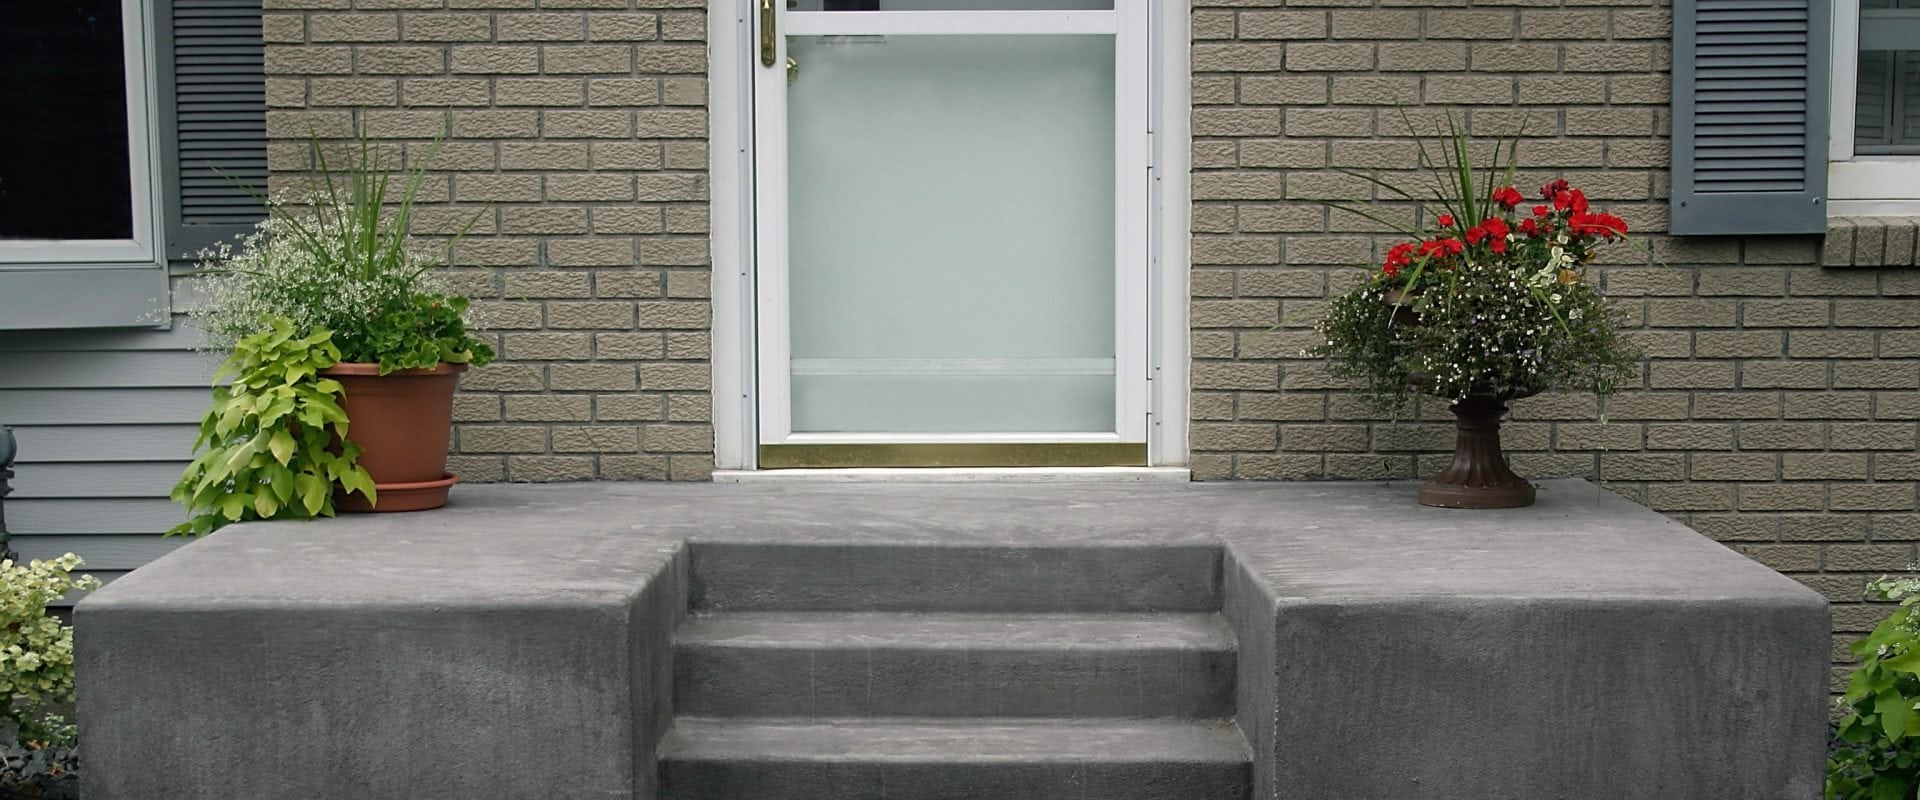 How much does it cost to repair the steps?